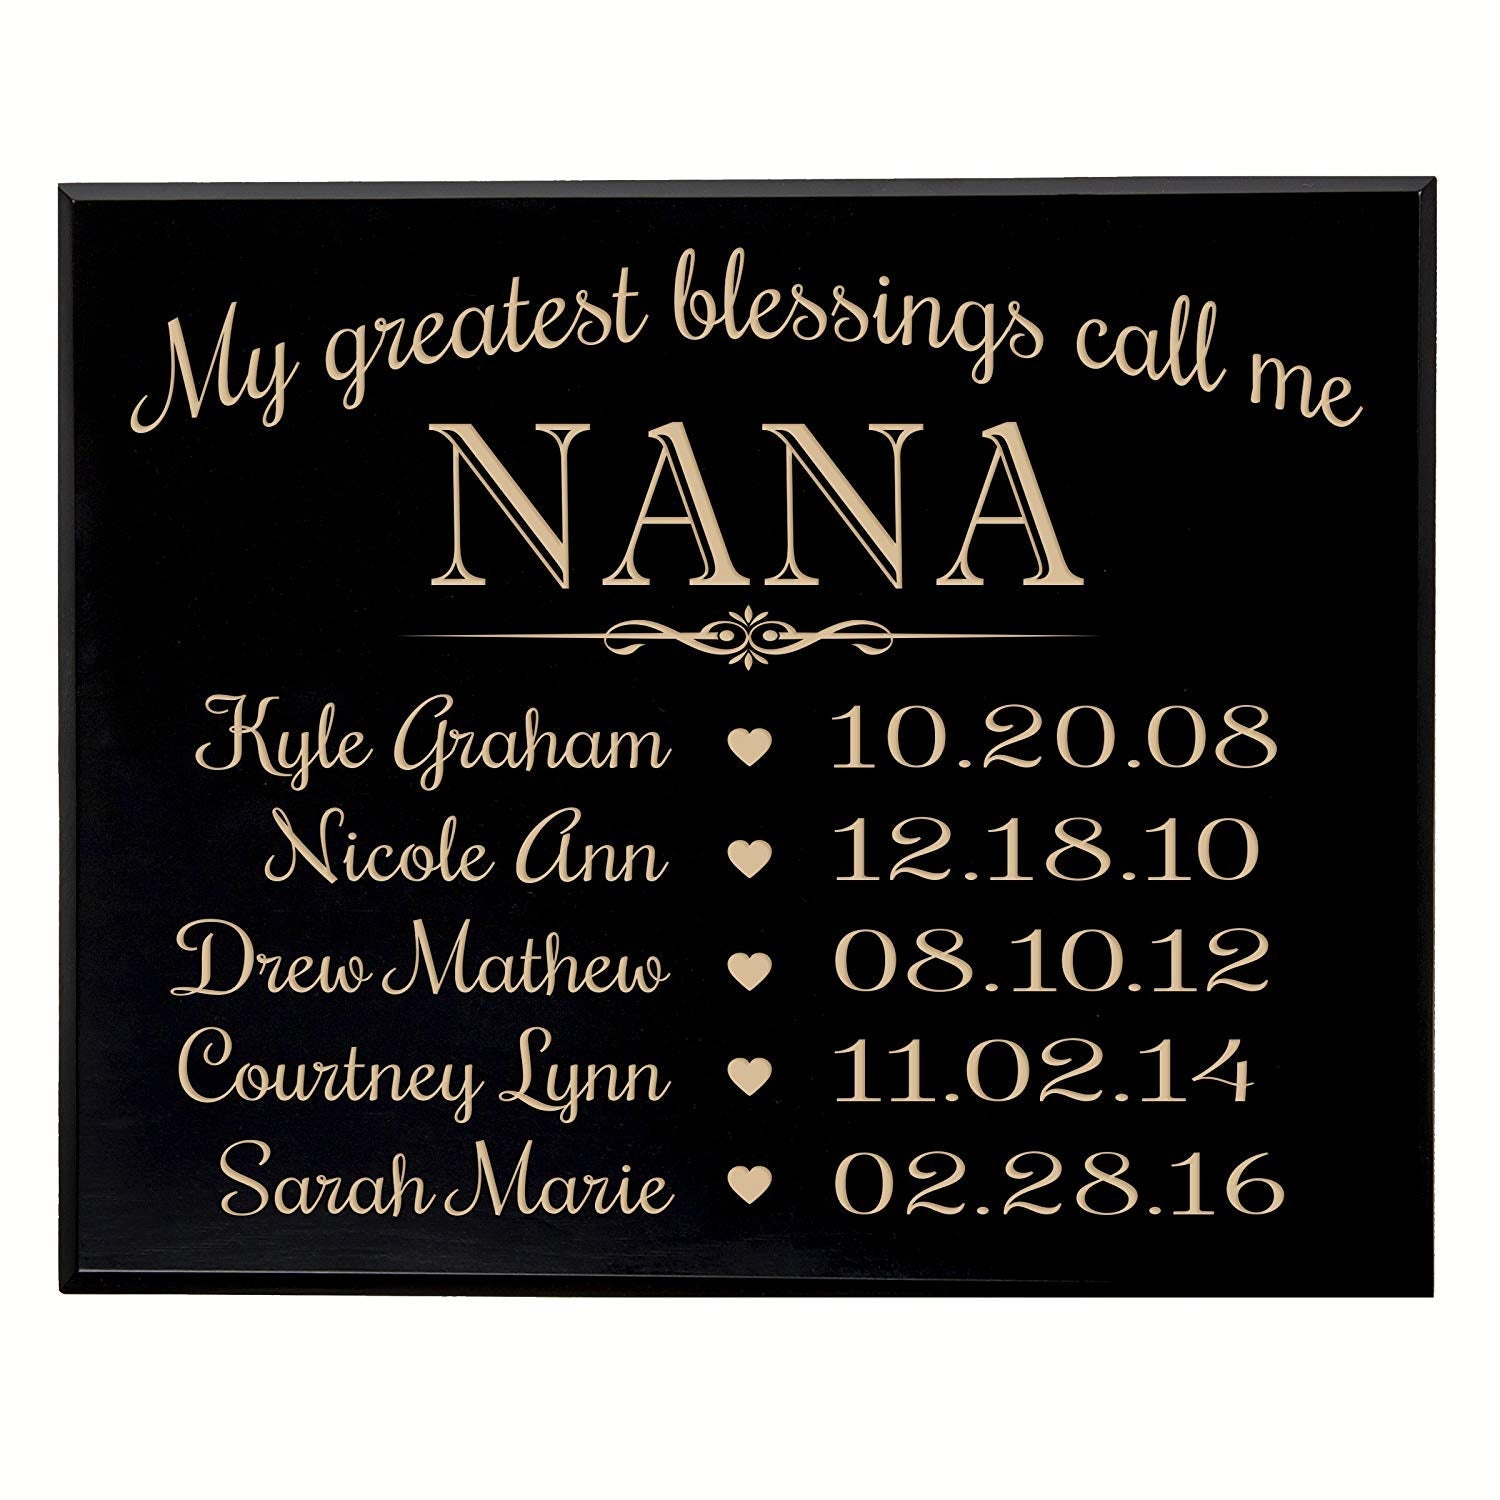 Personalized Children's Name's Wall Plaque - Nana - LifeSong Milestones